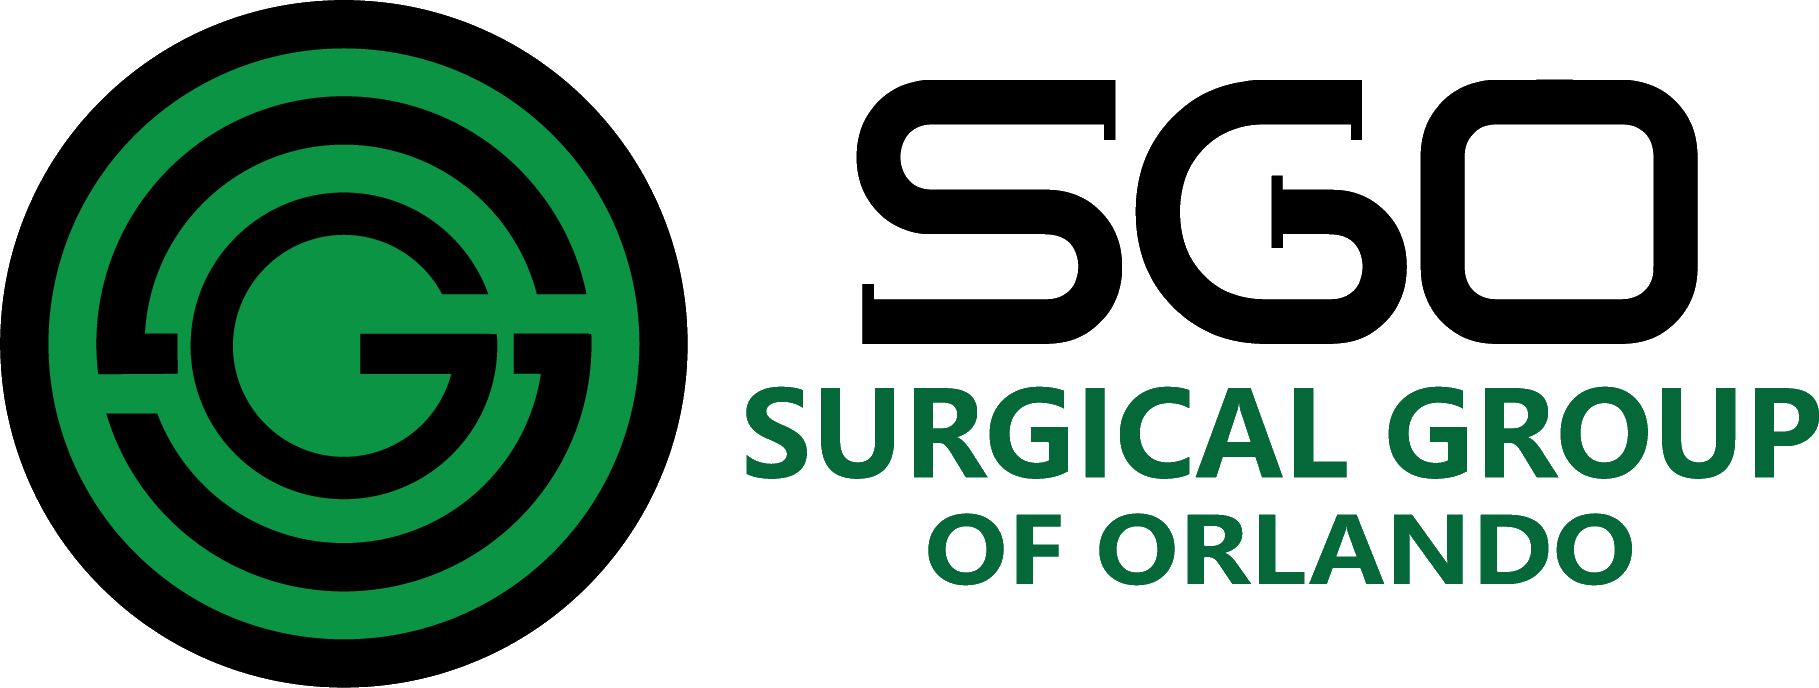 Surgical Group of Orlando